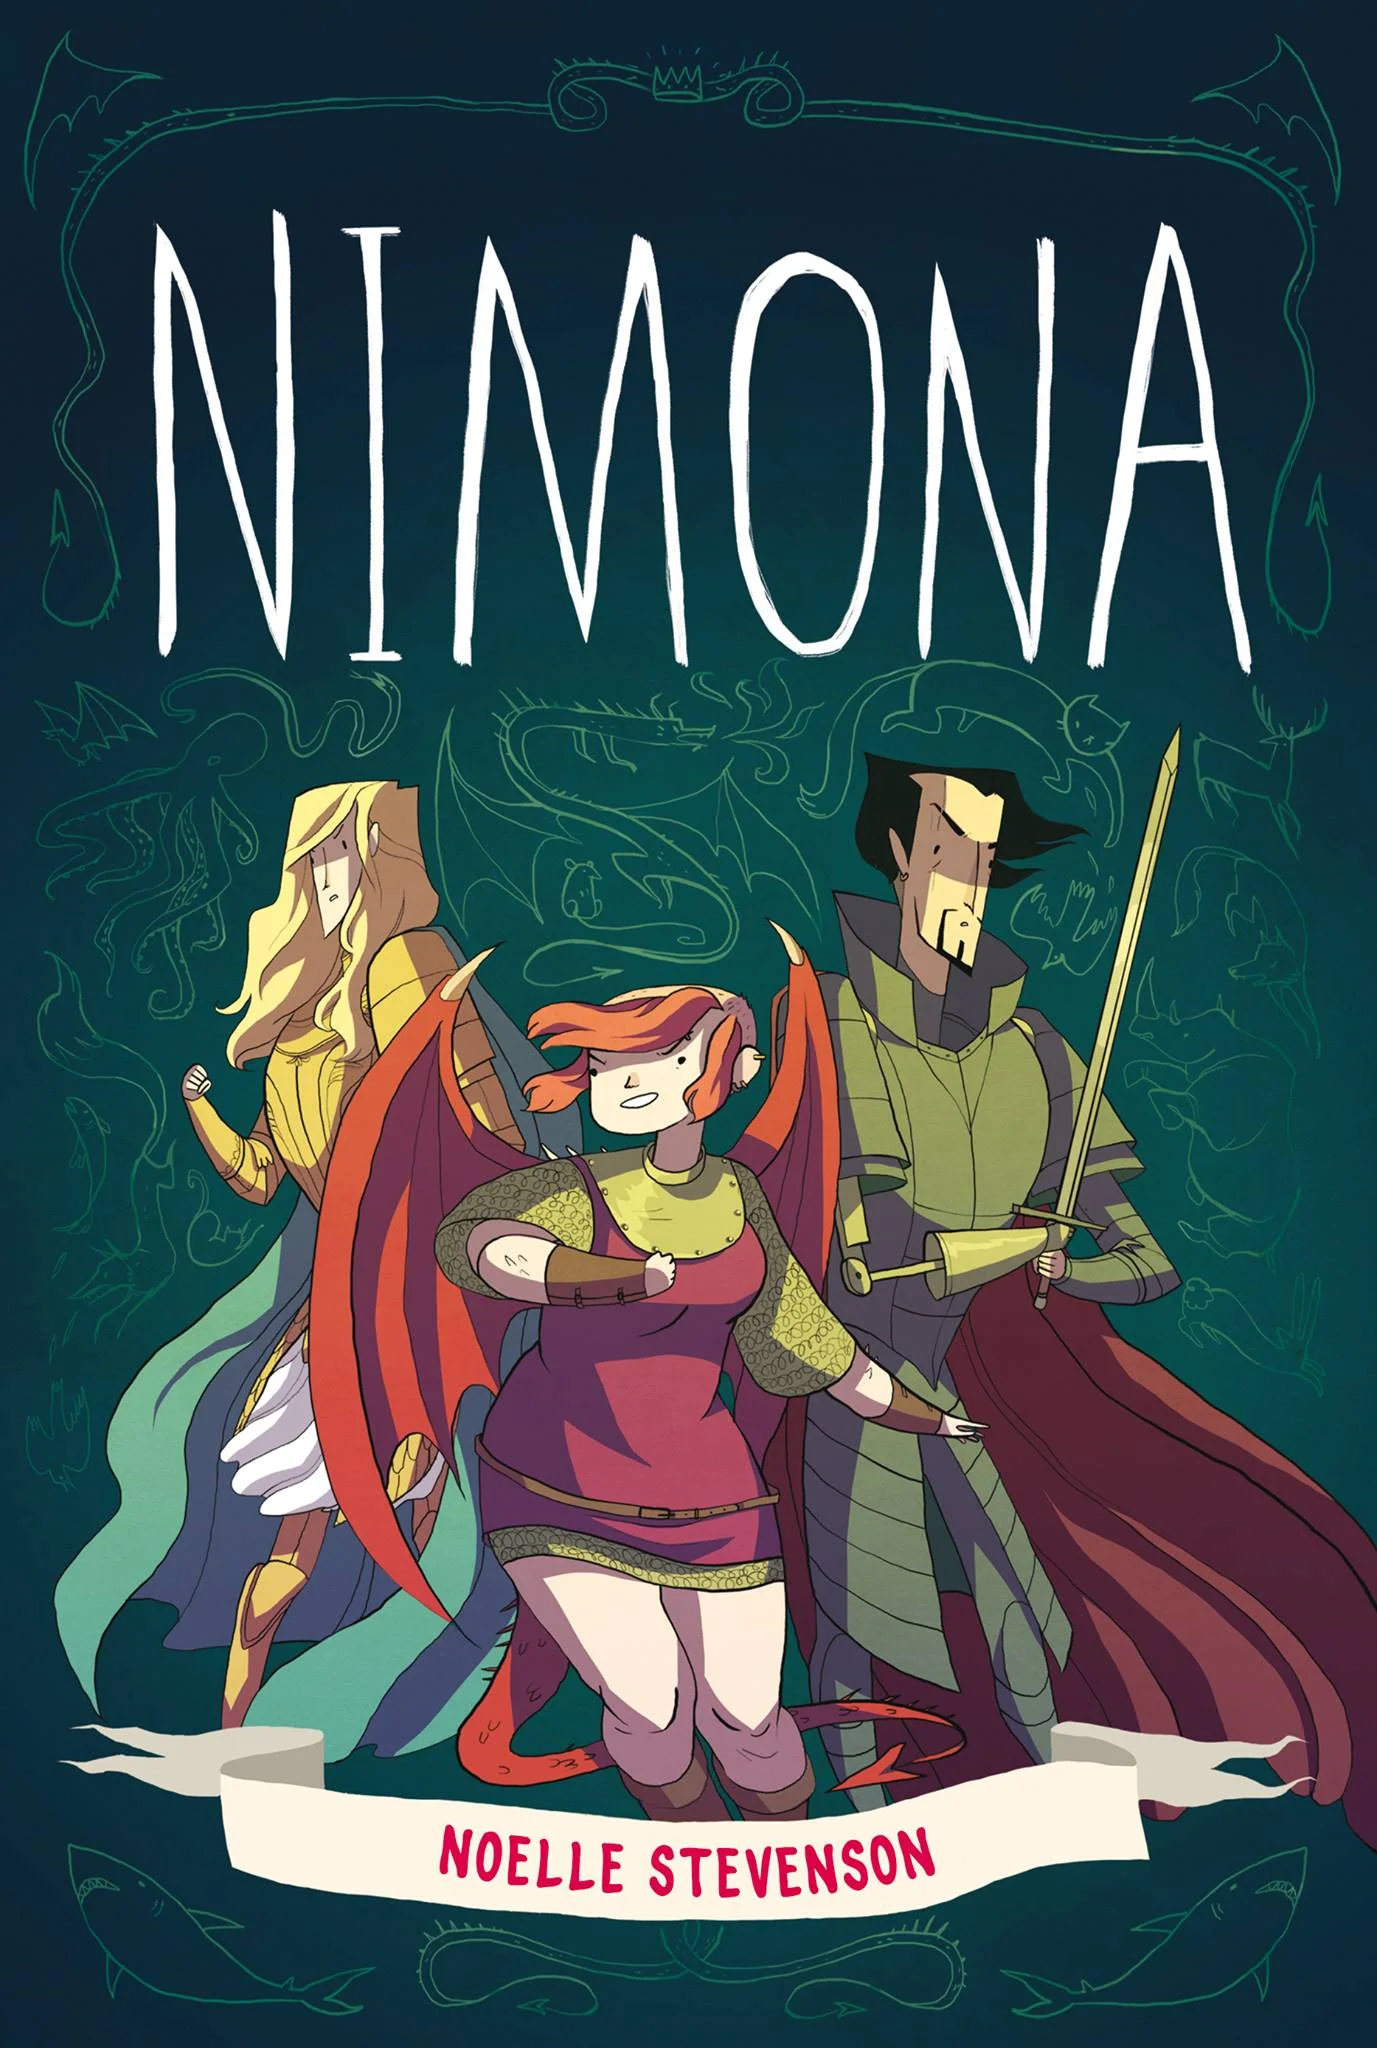 Nimona | An ode to monster girls in a graphic novel